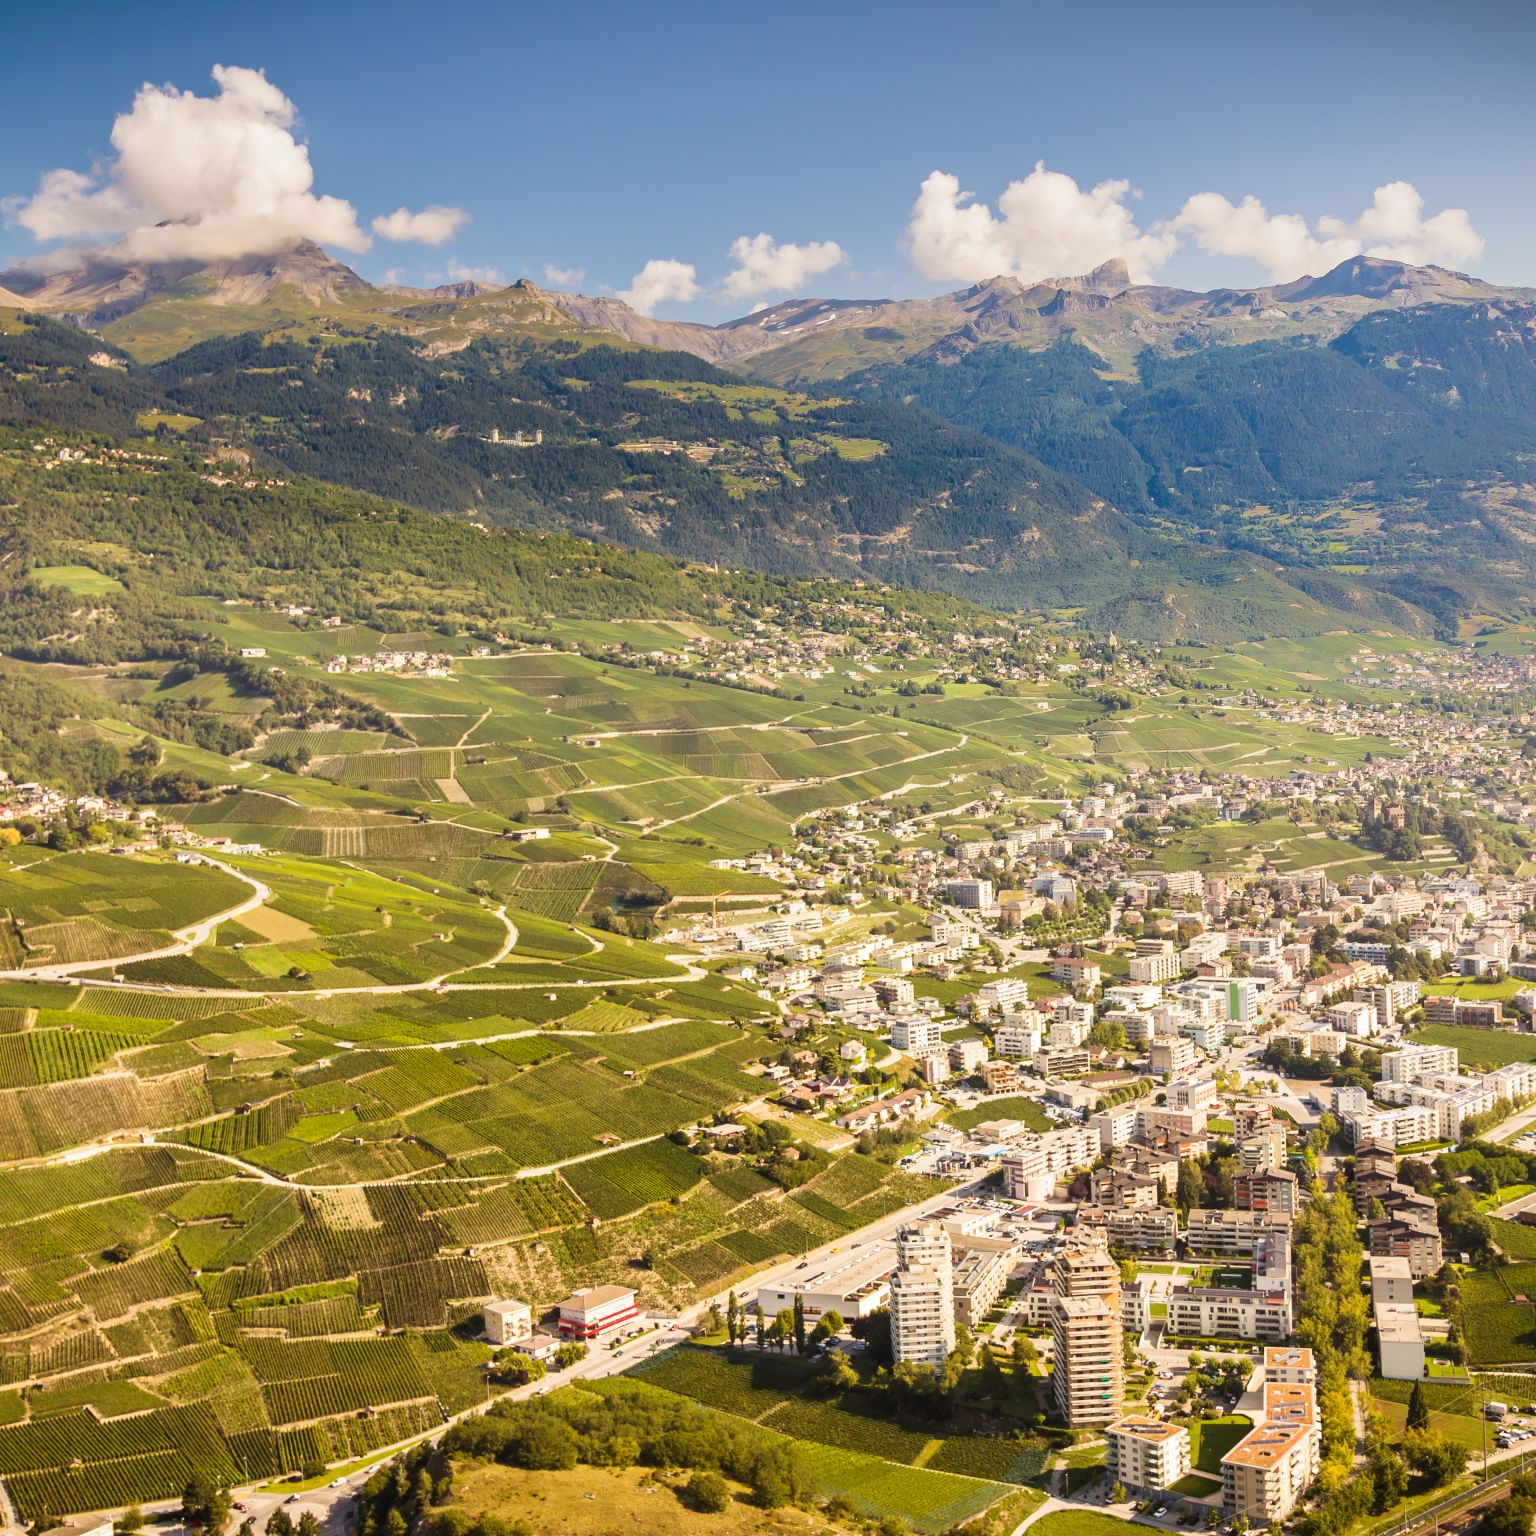 Sky view of the vineyard and the town of Sierre. Valais, Switzerland.